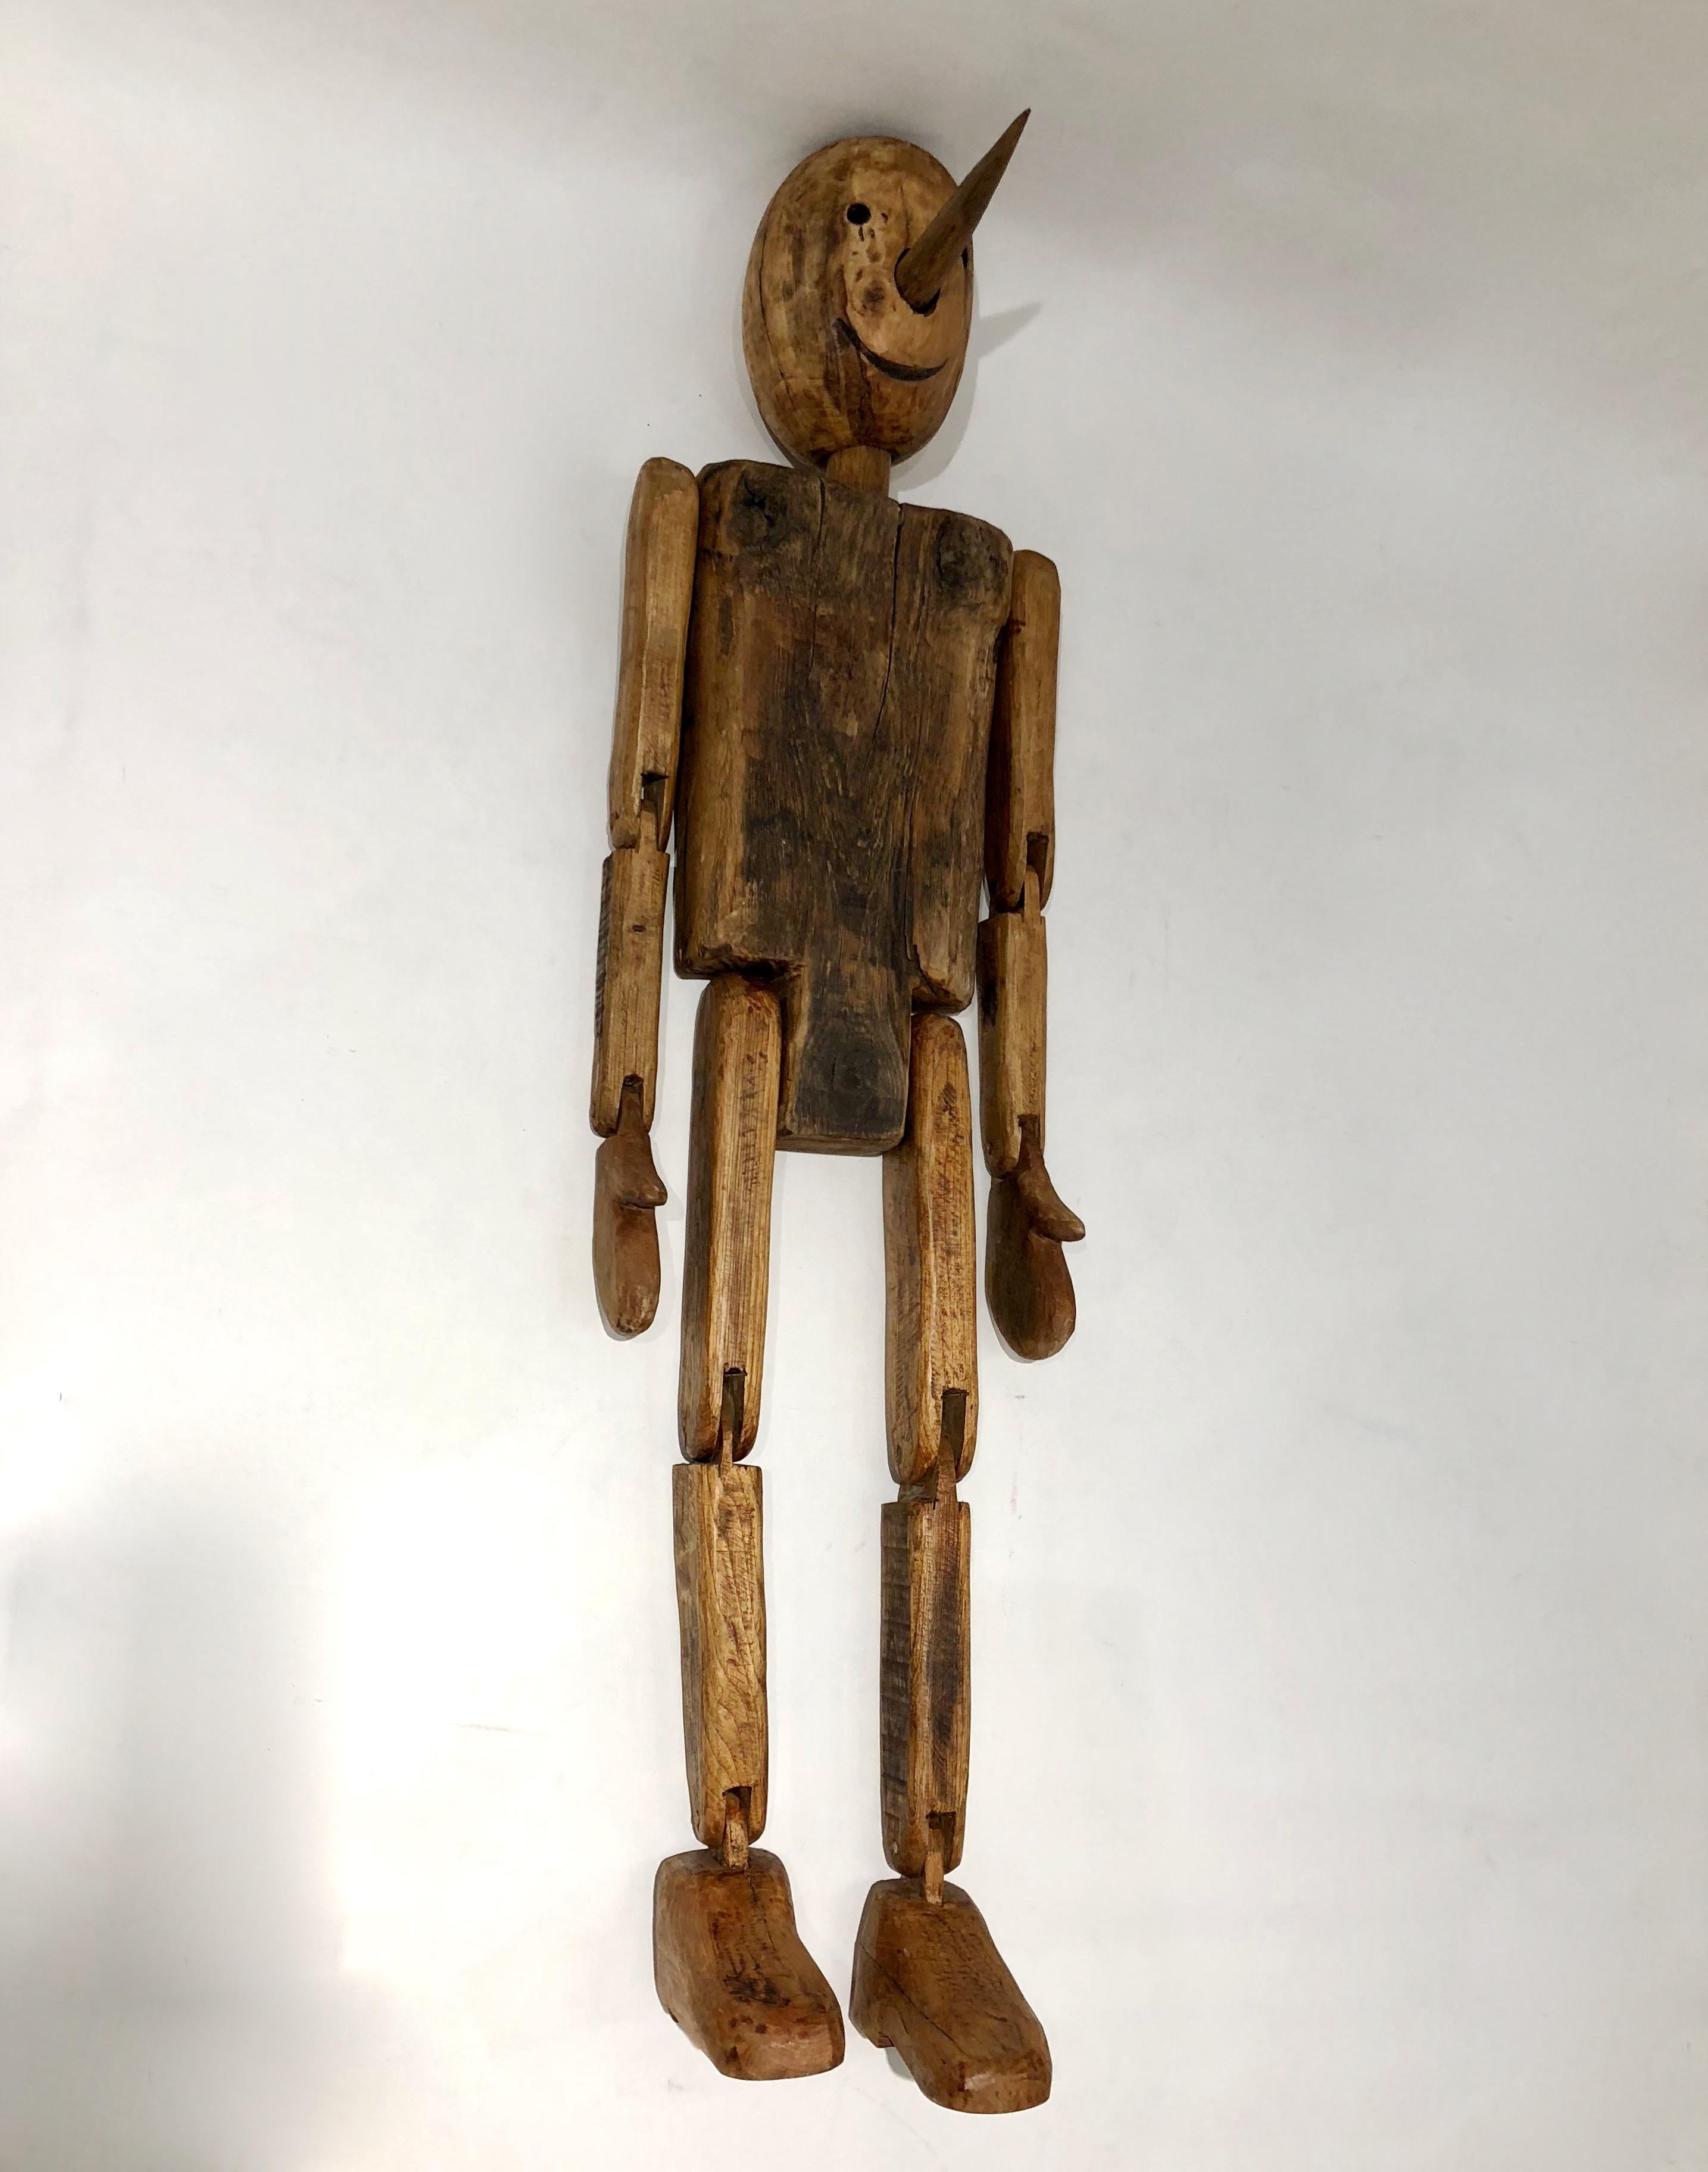 Modern 1960s Italian Vintage Life Size Articulated Wooden Pinocchio Sculpture 6